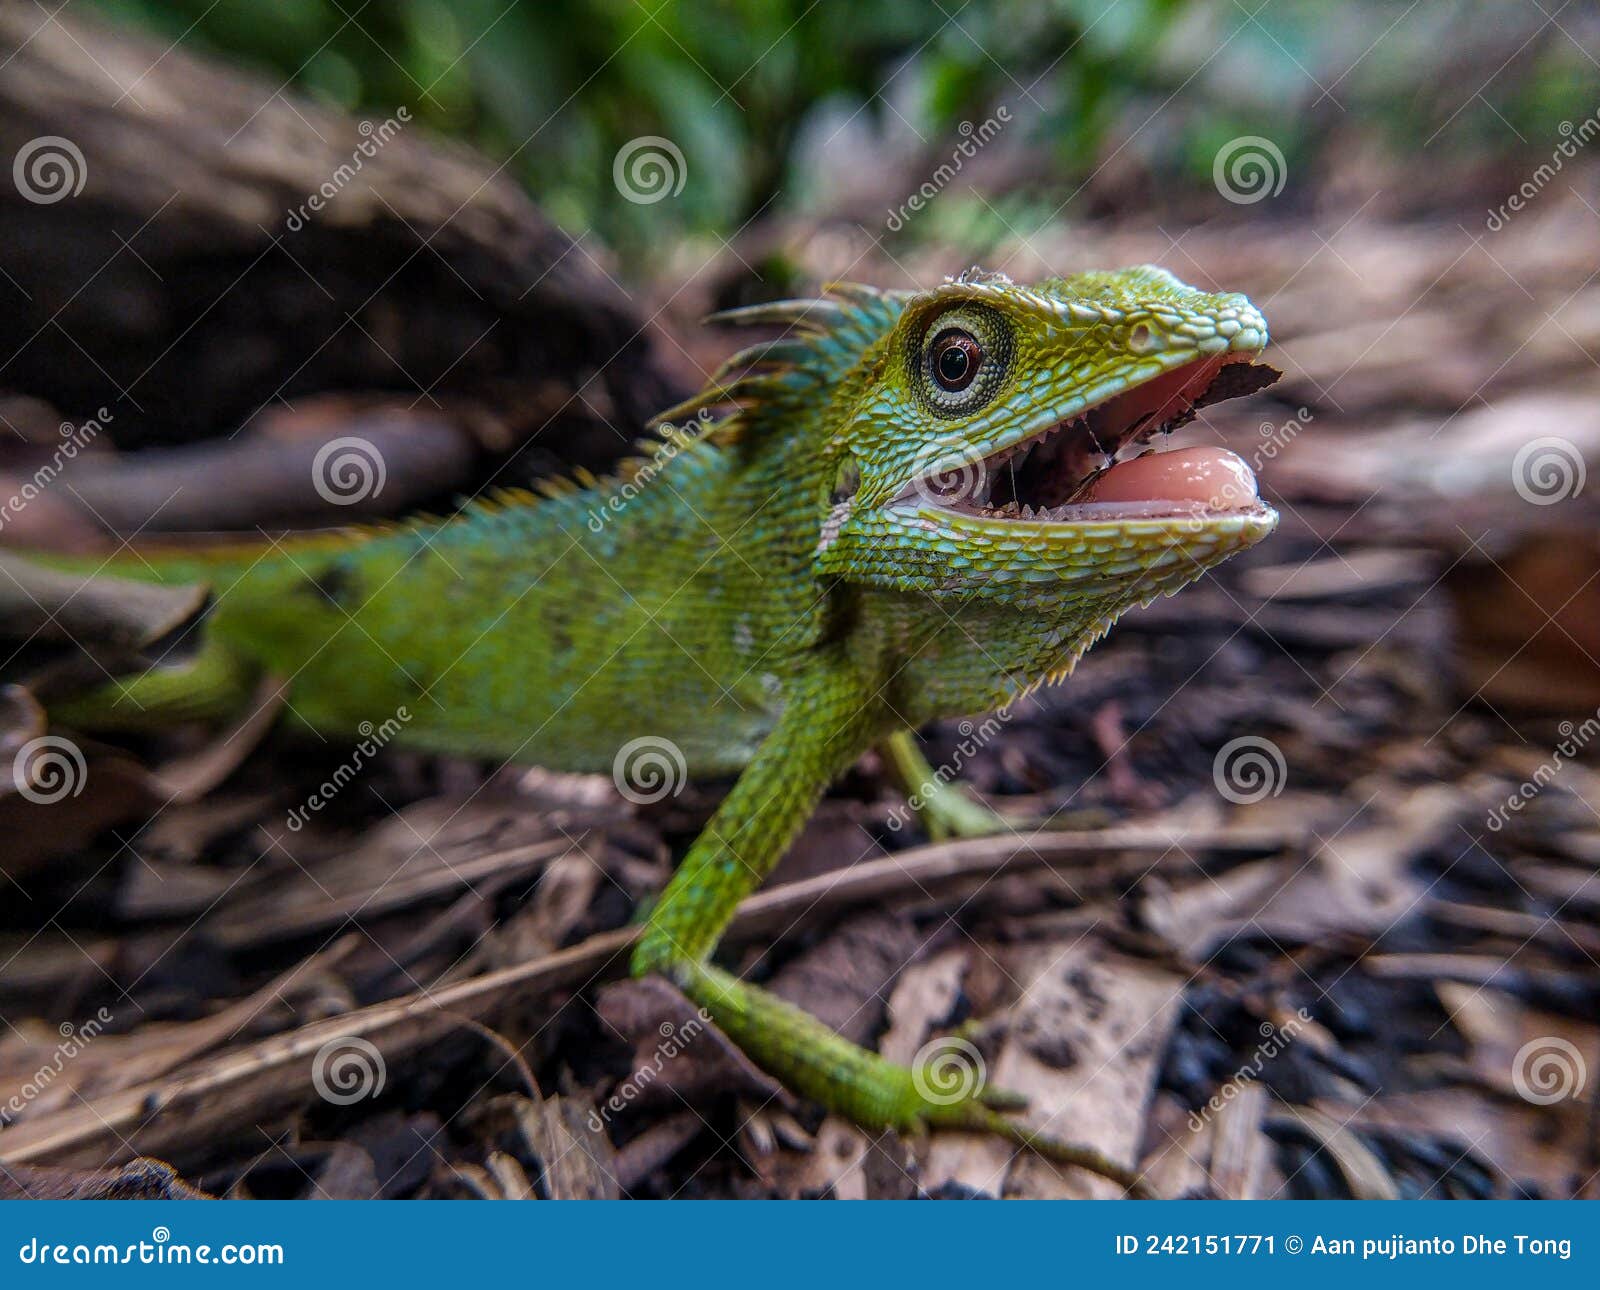 green chameleon on the ground. reptil. fauna, animals.